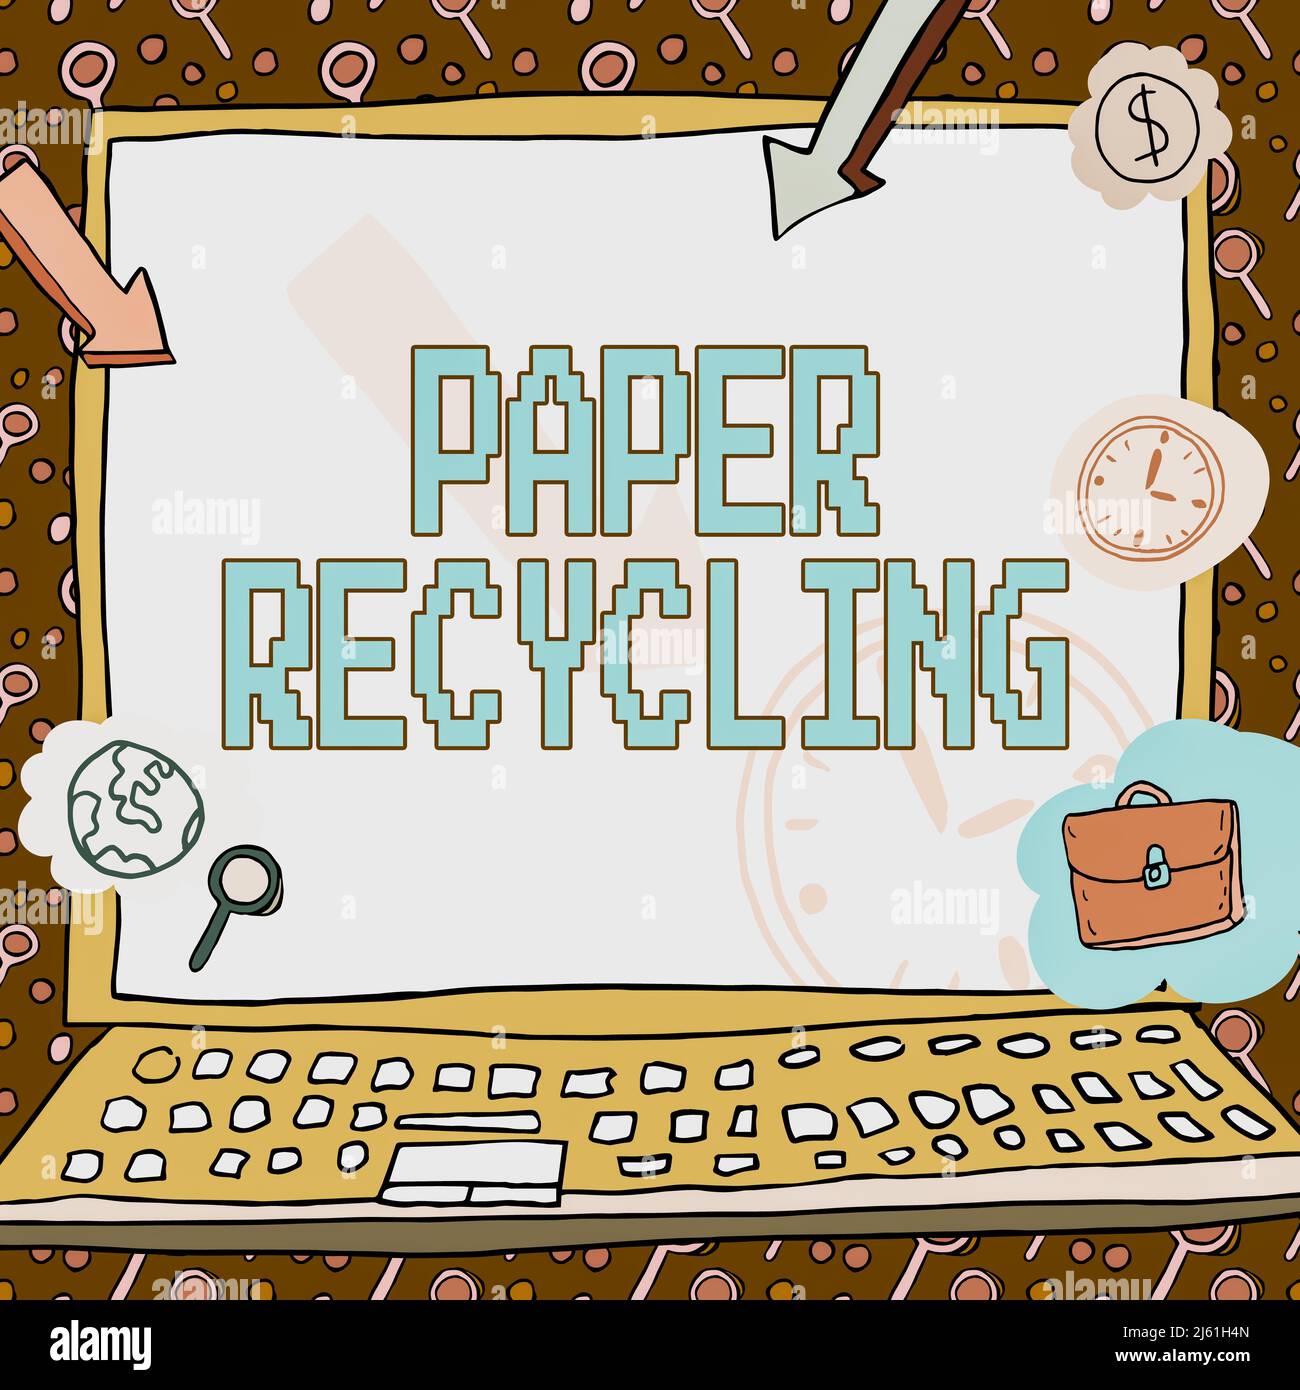 Inspiration showing sign Paper Recycling. Word Written on Using the waste papers in a new way by recycling them Poster decorated with monetary symbols Stock Photo